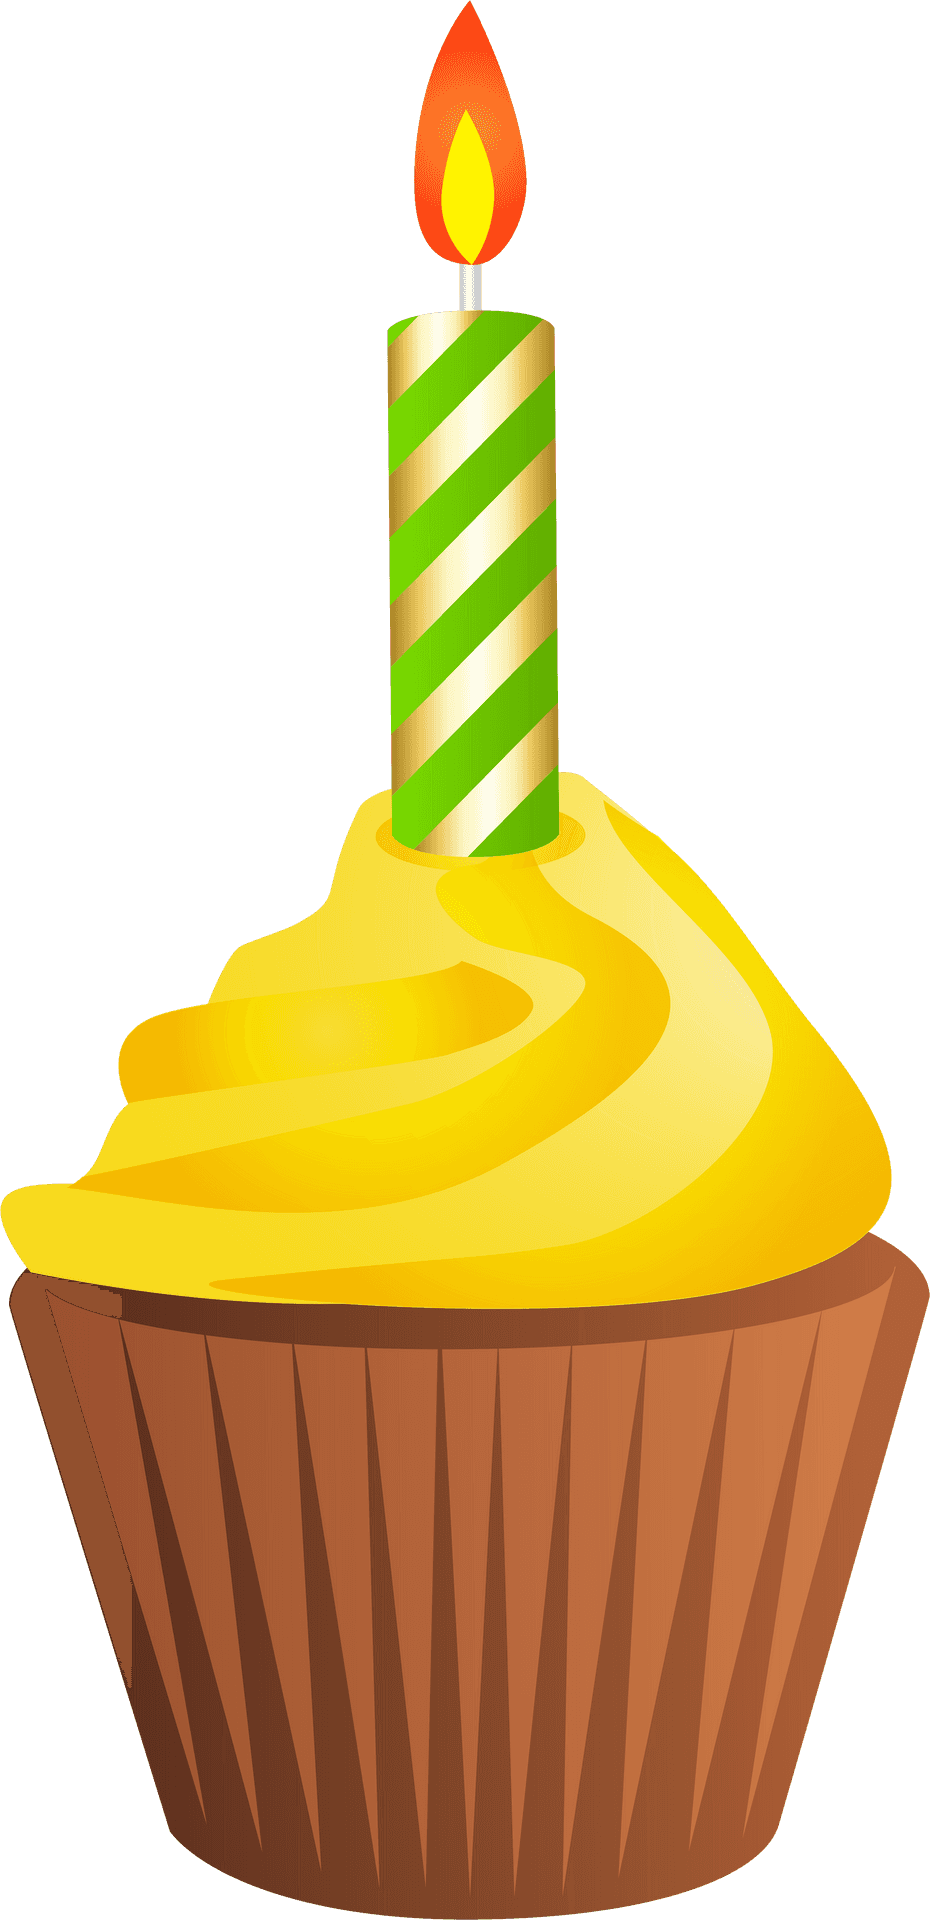 Birthday Cupcake With Candle PNG